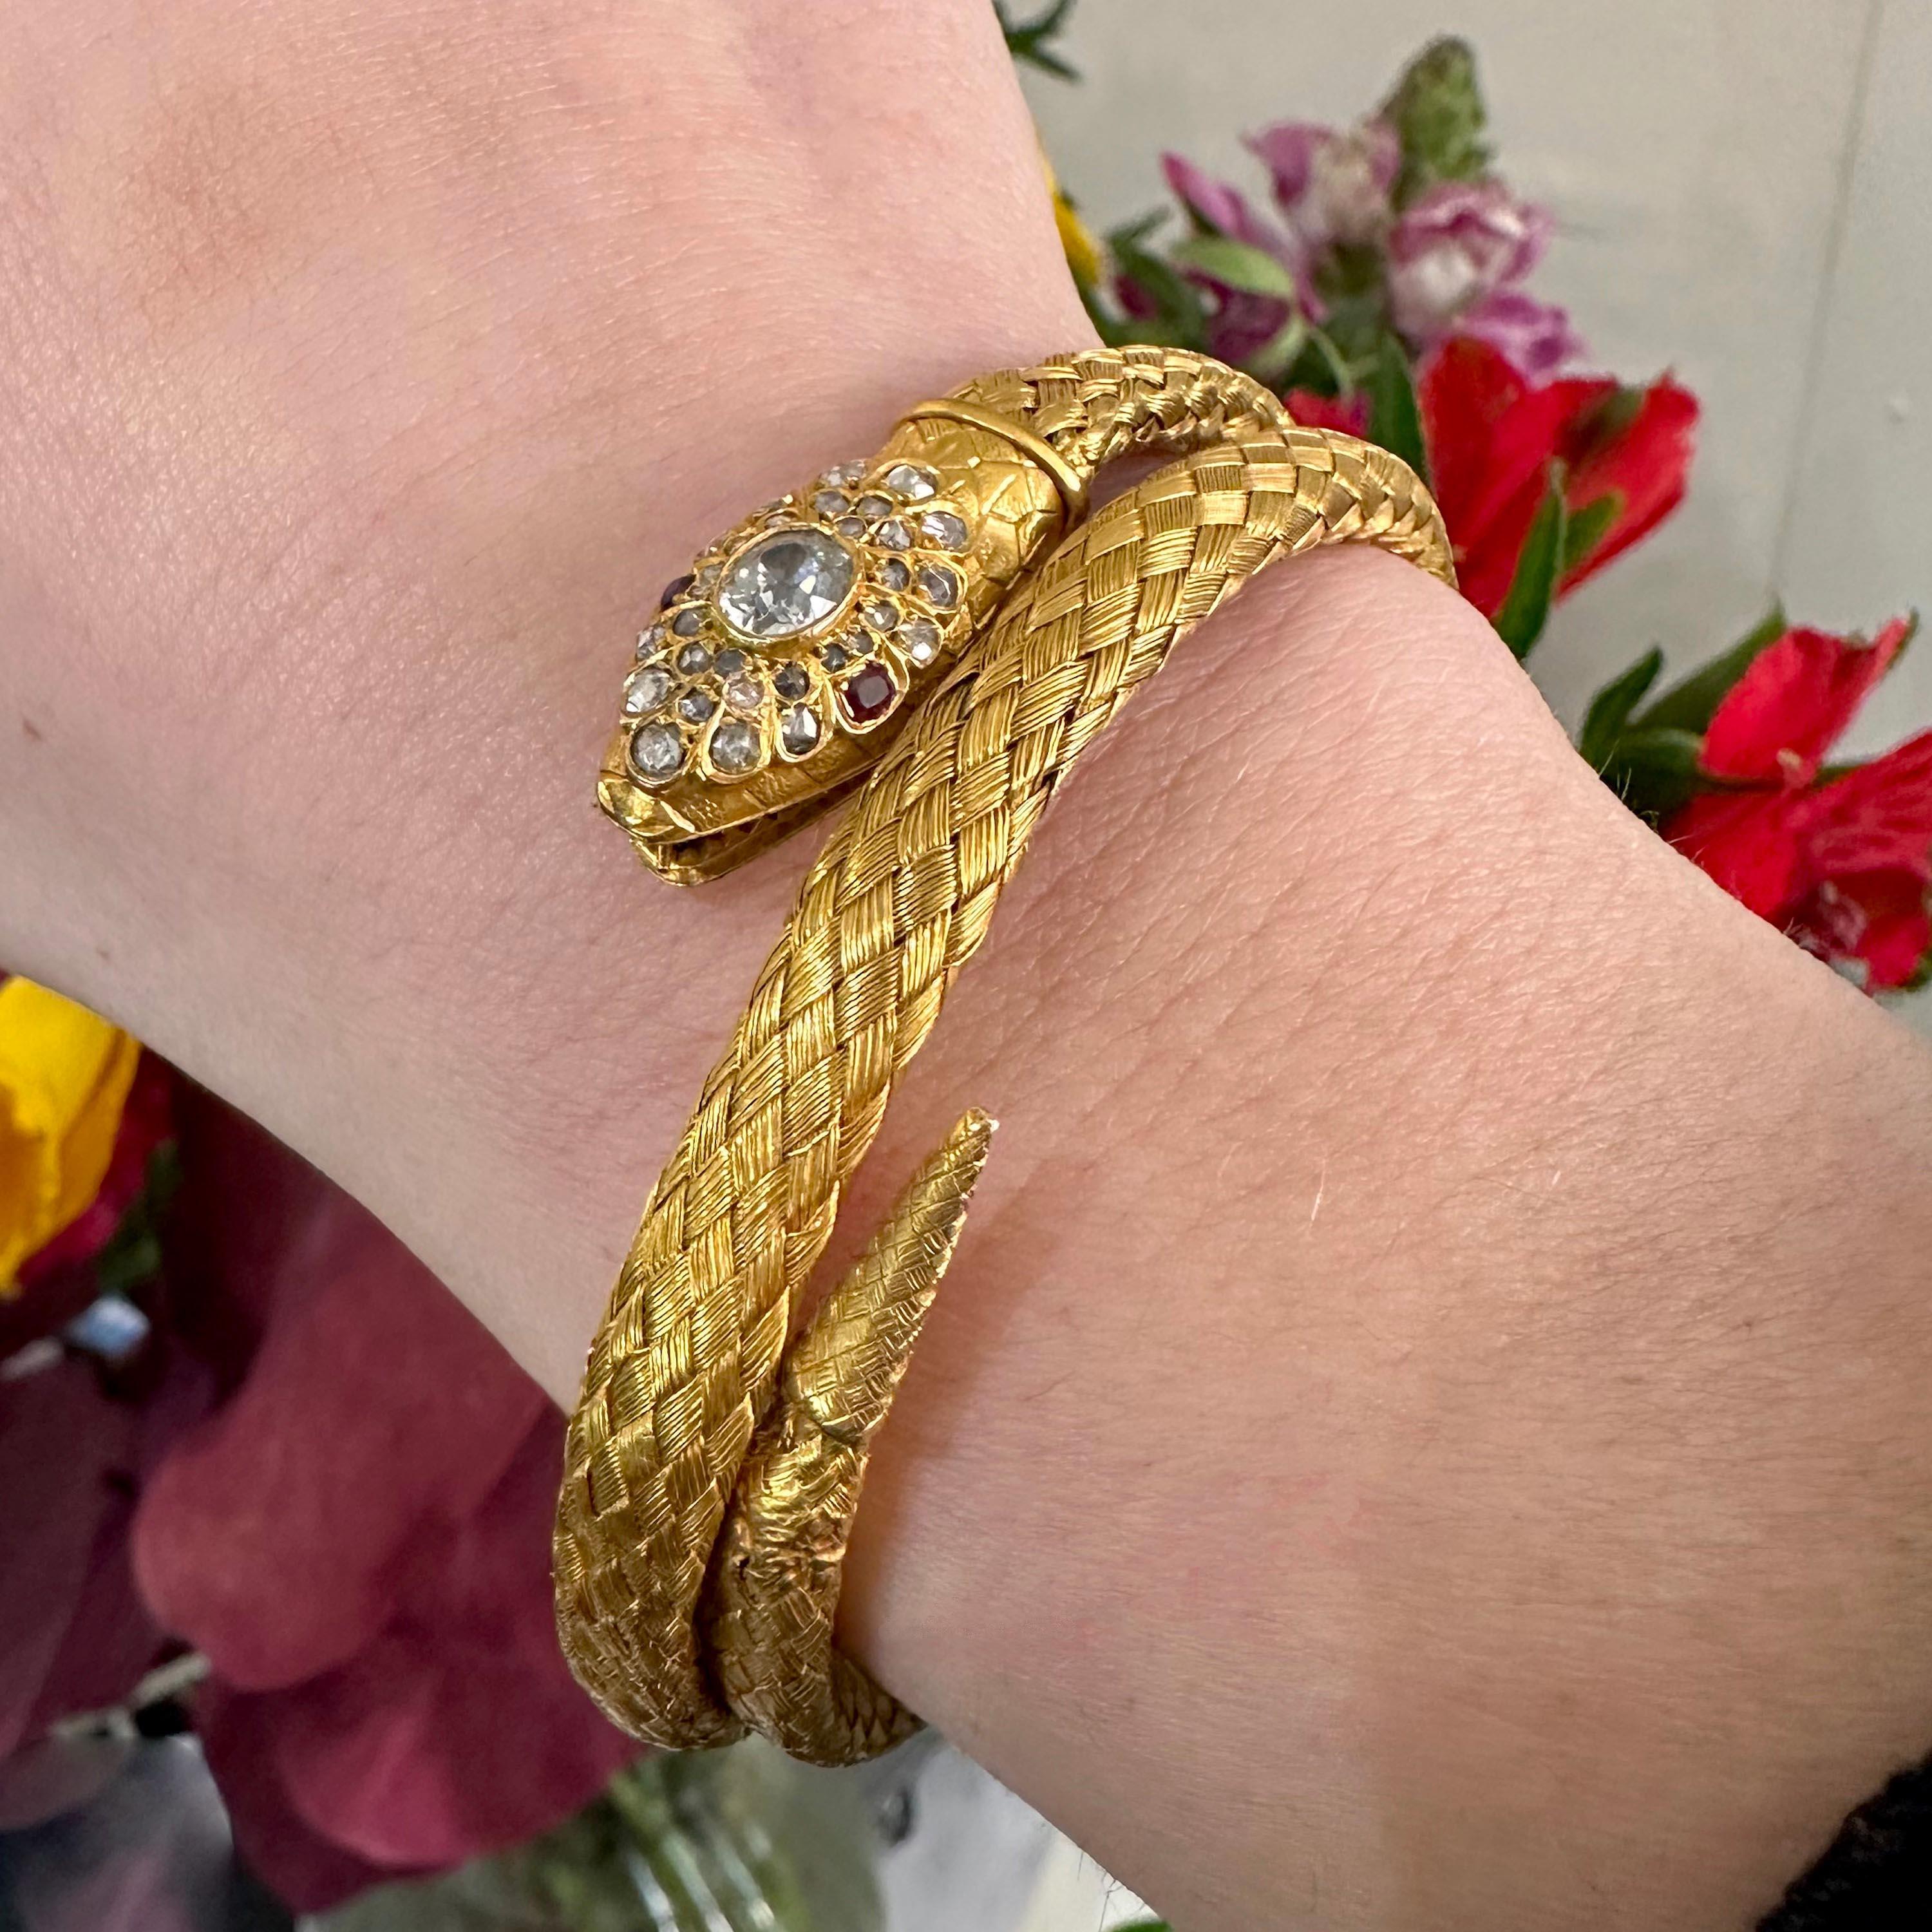 An antique gold coiled snake bracelet, the head is set with an oval, old-cut diamond, in a rub over setting, in a cluster surround of rose-cut diamonds and cushion shaped ruby eyes, it is engraved to represent scales, the open mouth features teeth